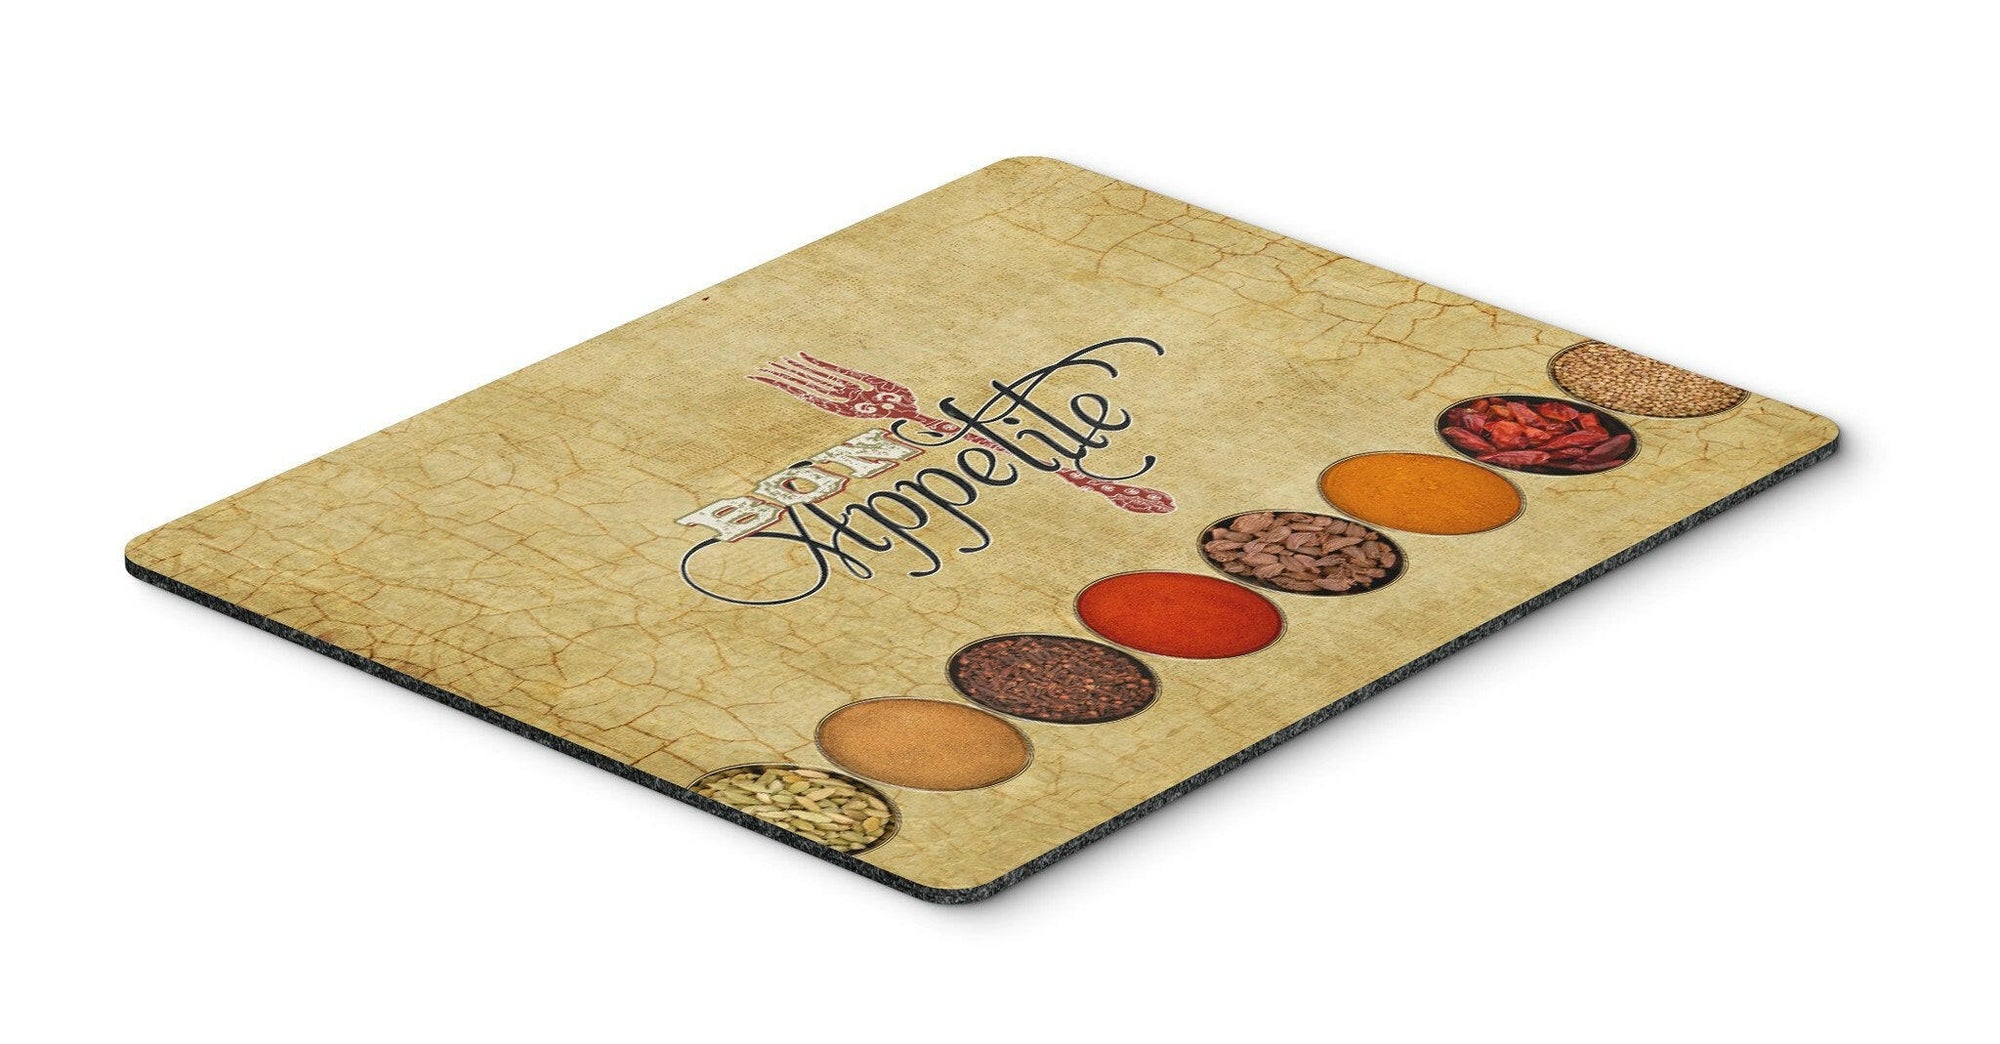 Bon Appetite and Spices Mouse Pad, Hot Pad or Trivet SB3089MP by Caroline's Treasures